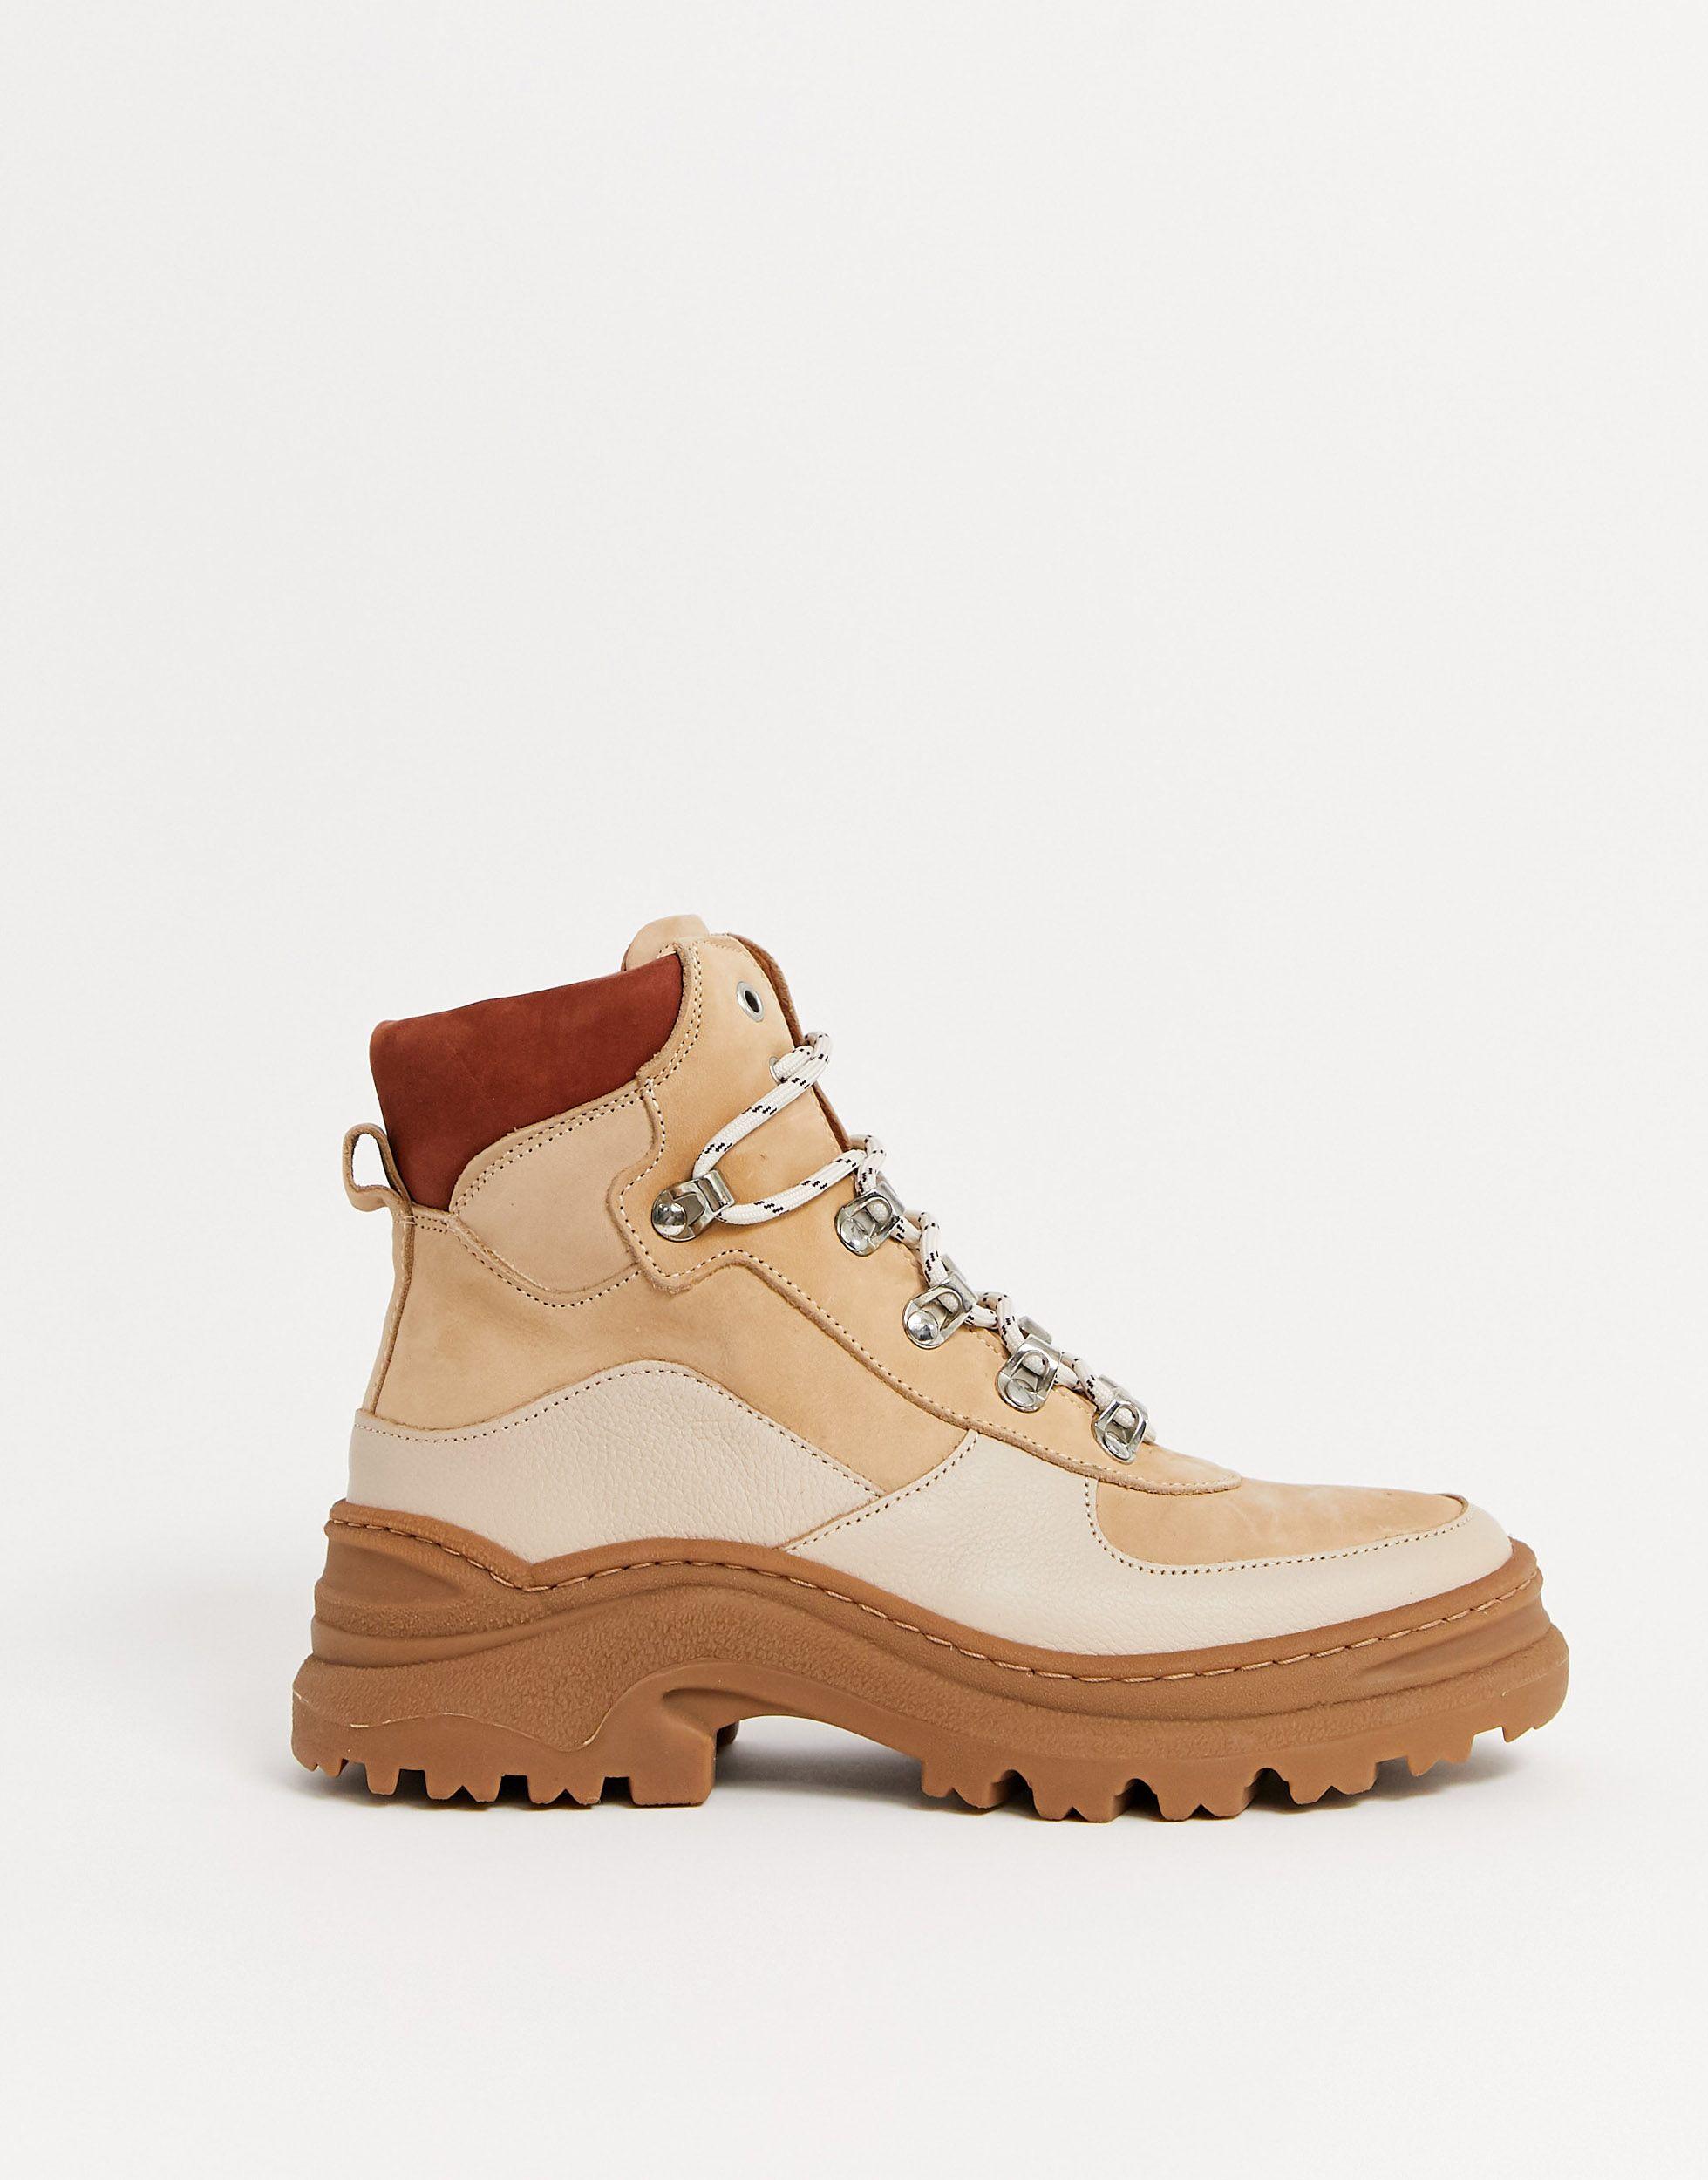 & Other Stories Chunky Platform Hiking Boots in Orange | Lyst